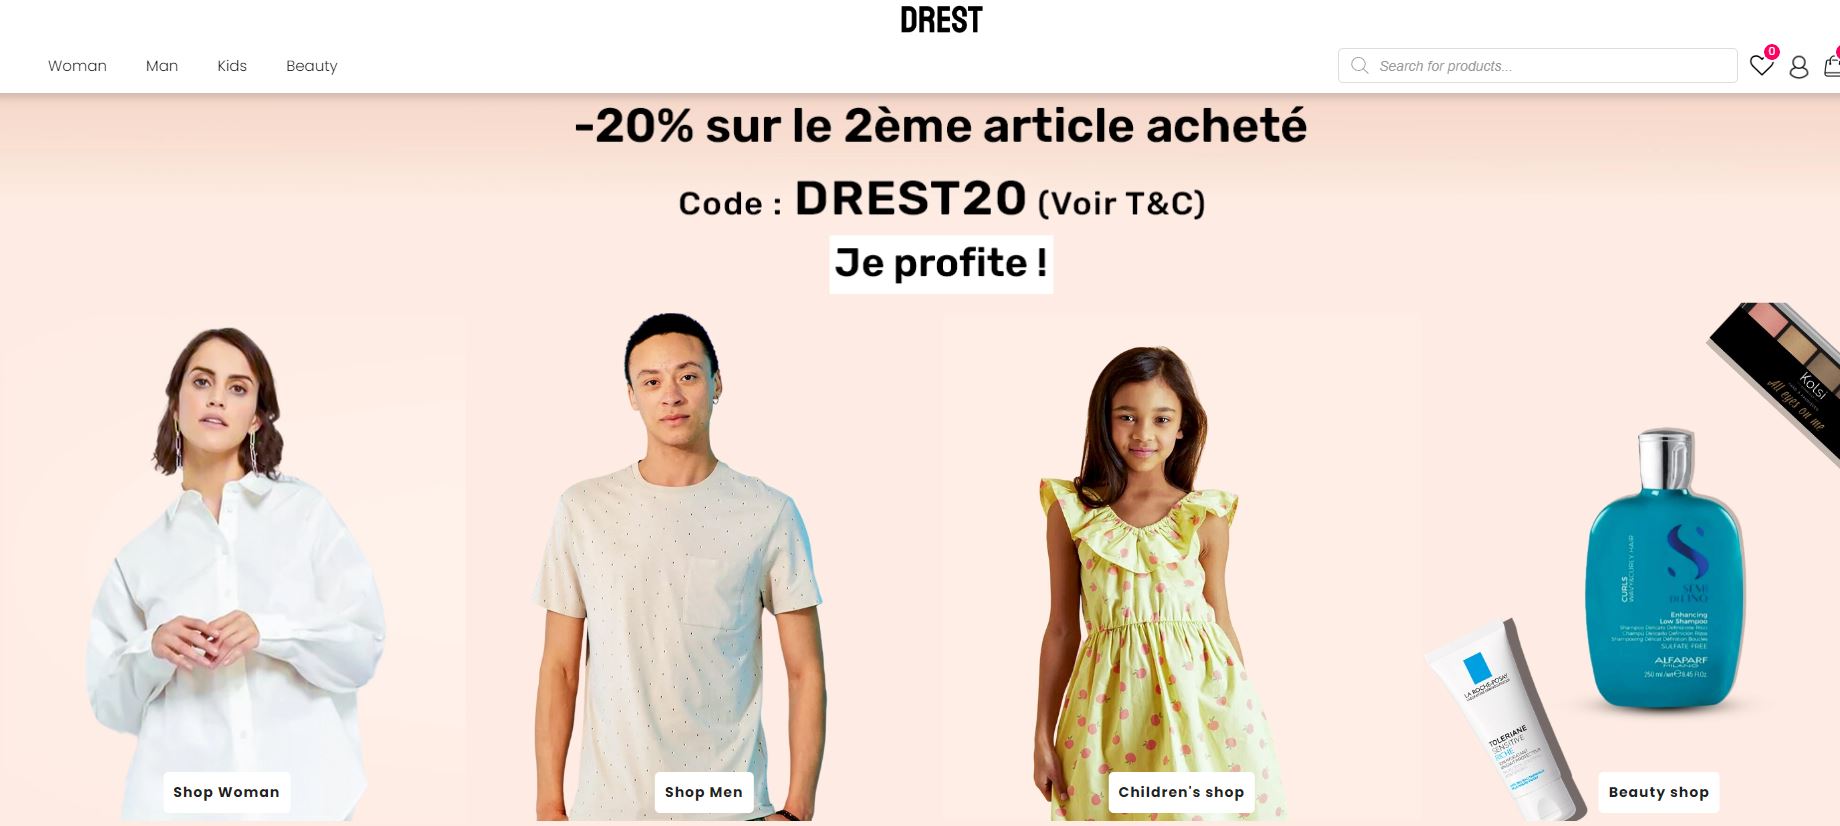 Drest.tn, the Tunisian e-commerce startup, has recently secured $336K in funding